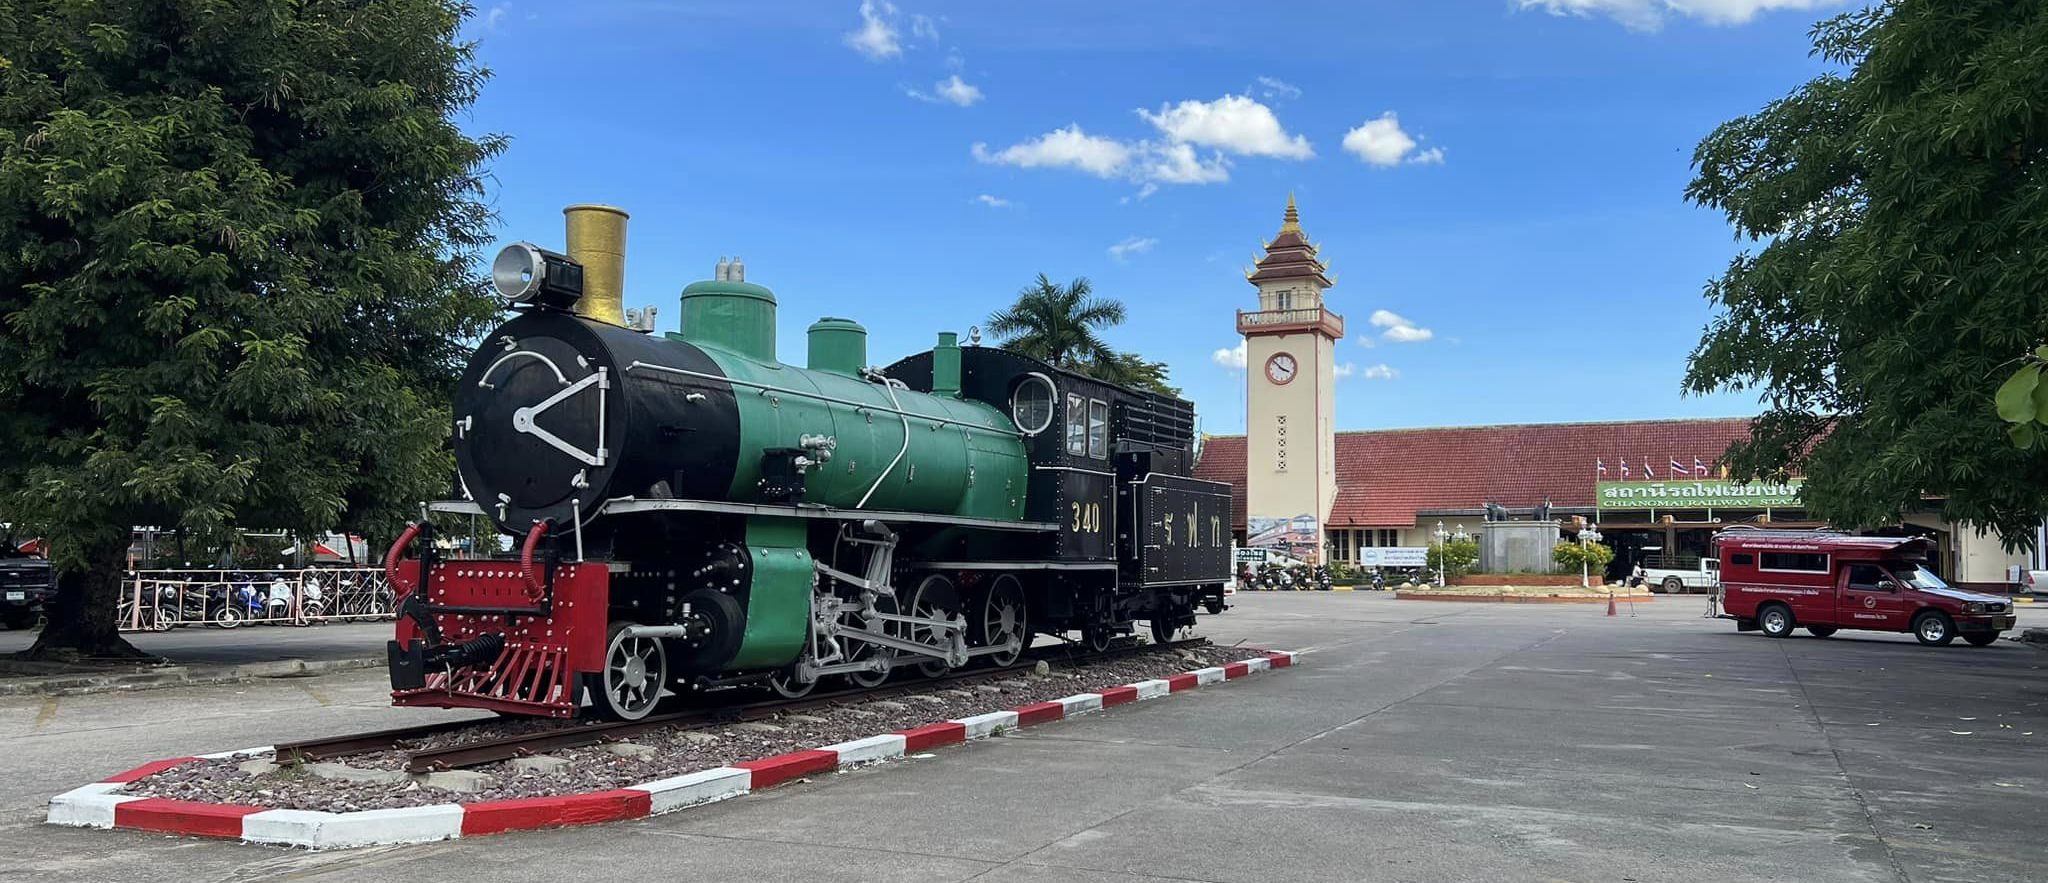 Old steam locomotive in Chiang Mai in northern Thailand